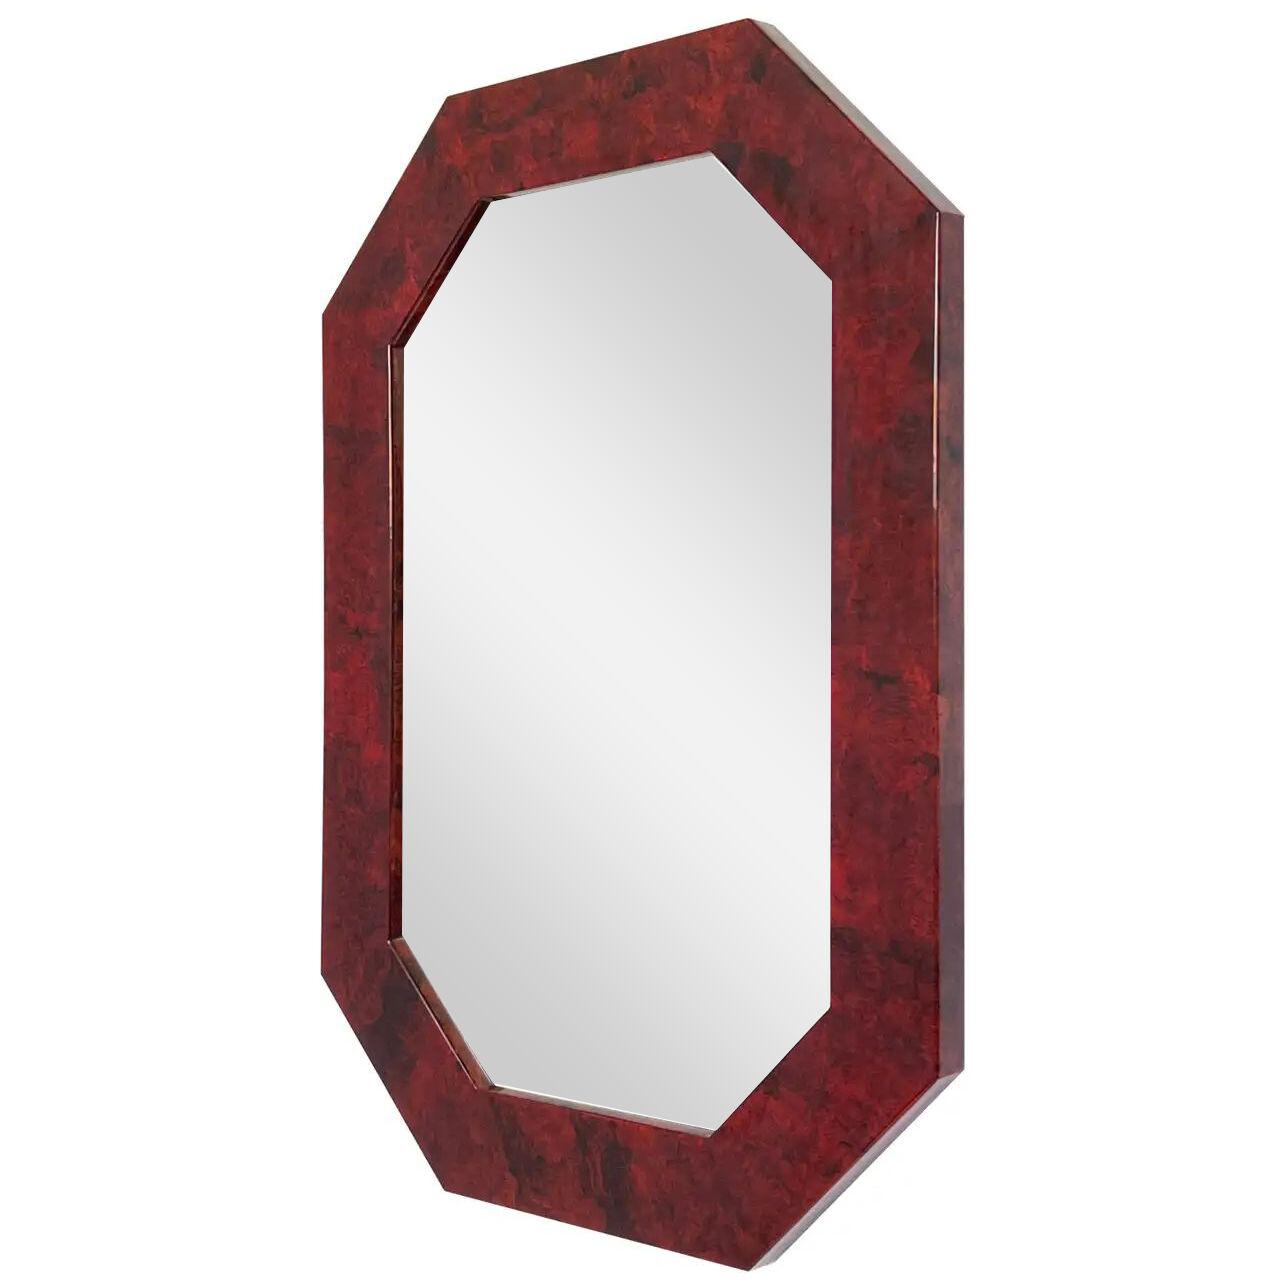 Octagonal Shape Red Lacquered Burl Wood Wall Mirror